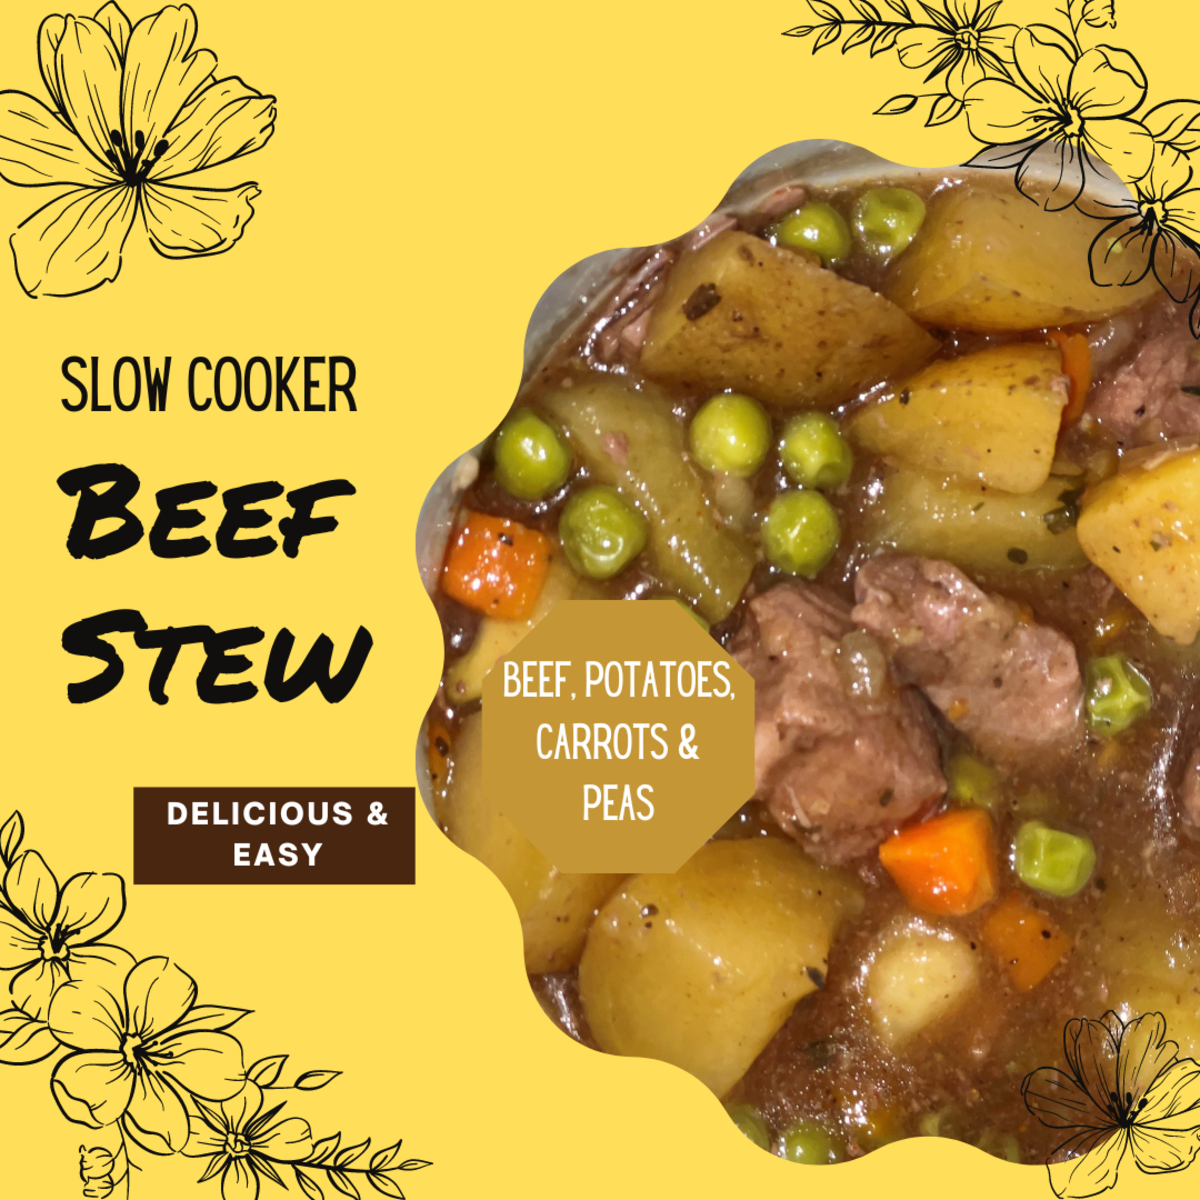 Slow Cooker Beef Stew With Potatoes, Carrots, and Peas